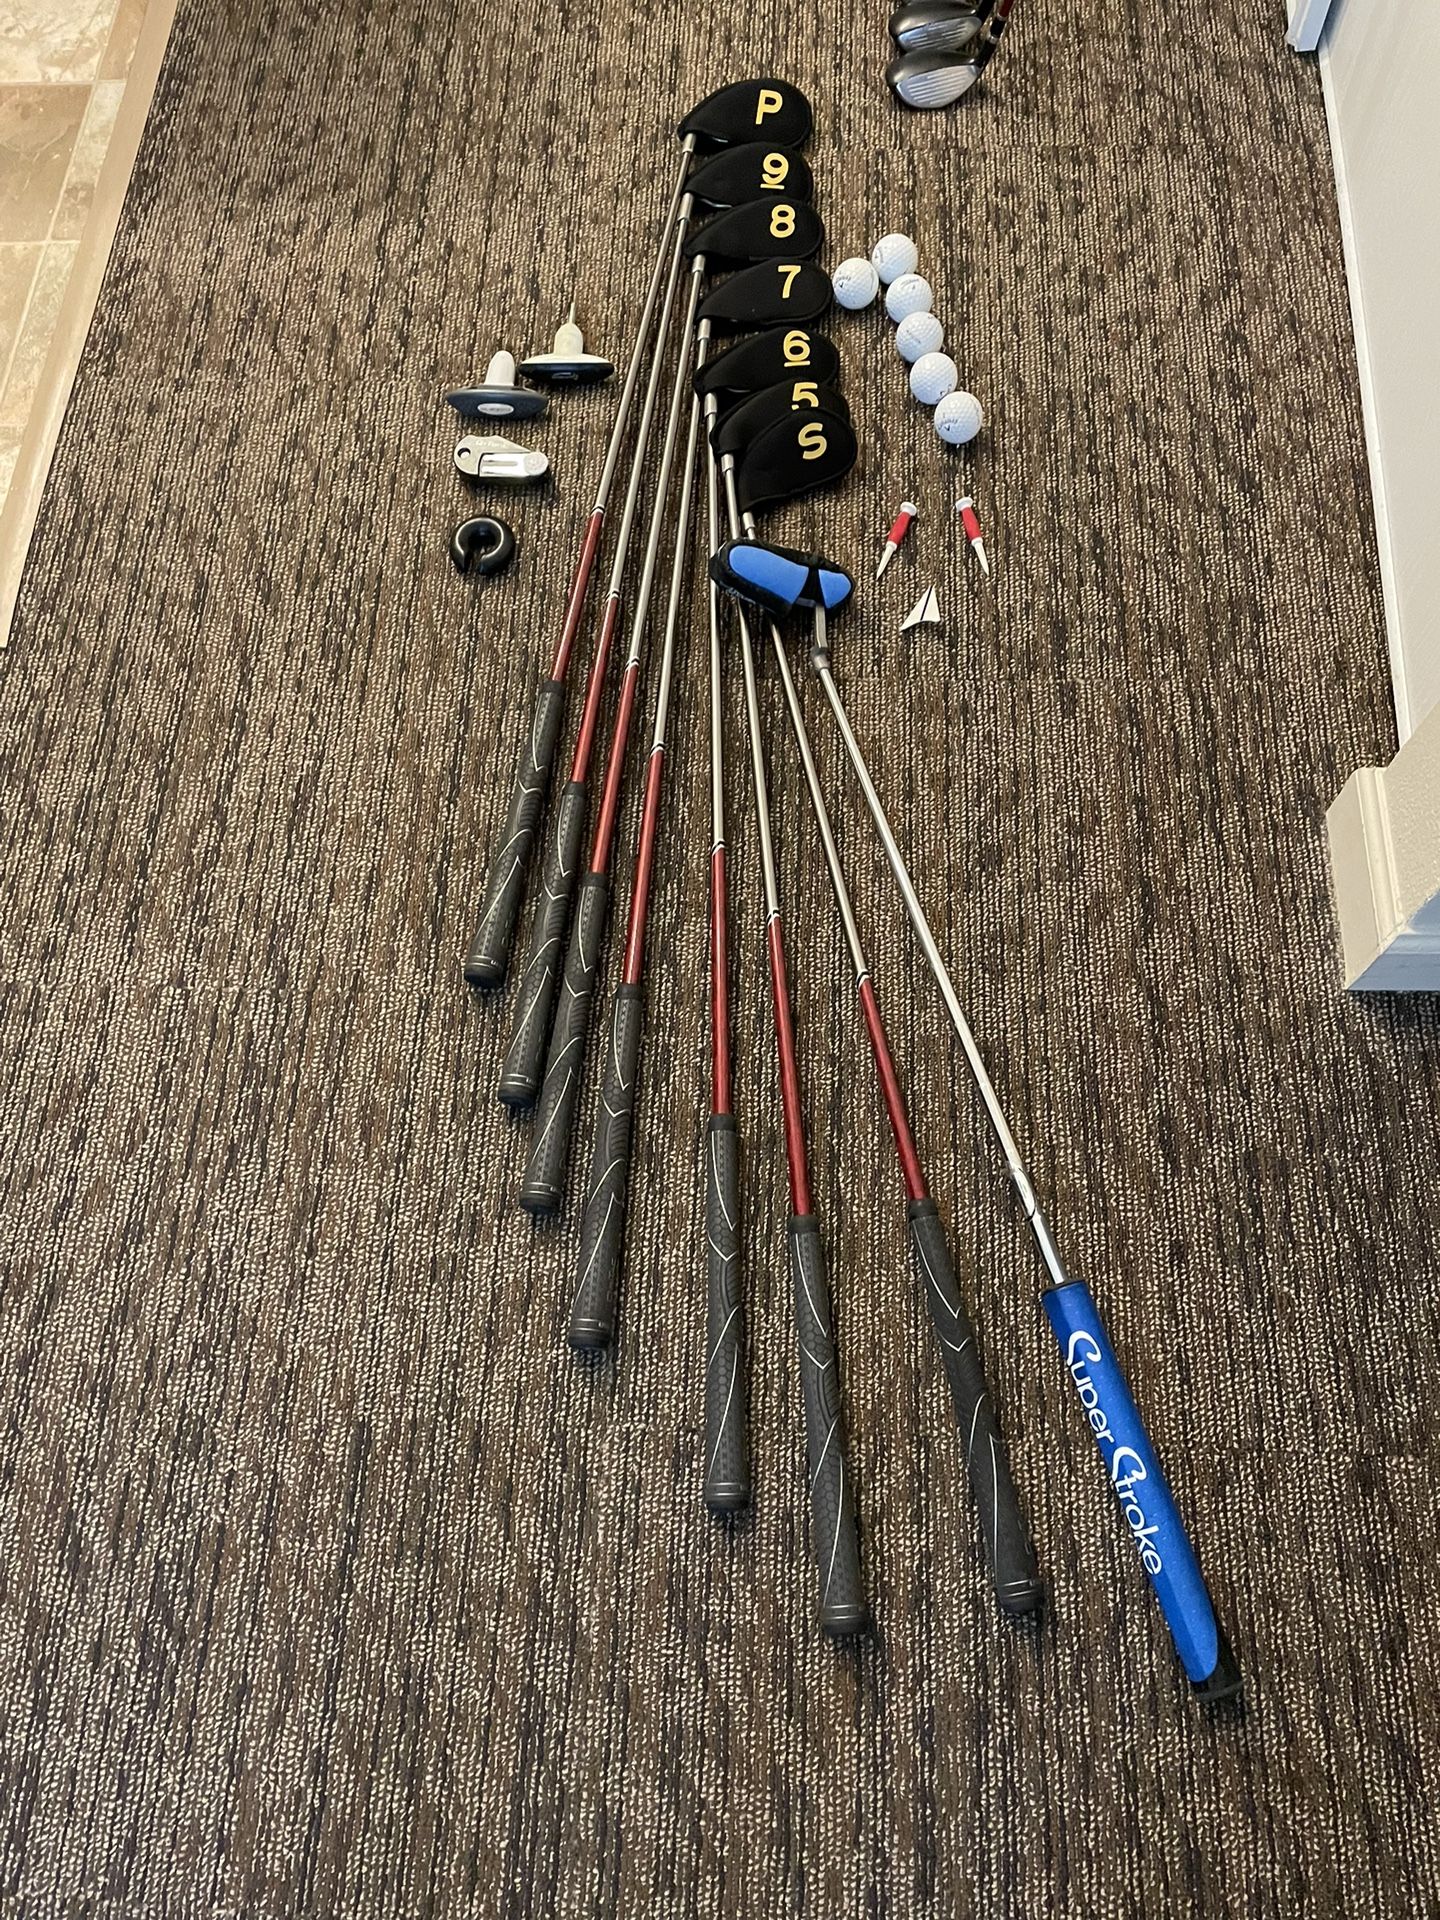 Full Set Of Excellent Golf Clubs, Ready To Go Golfing